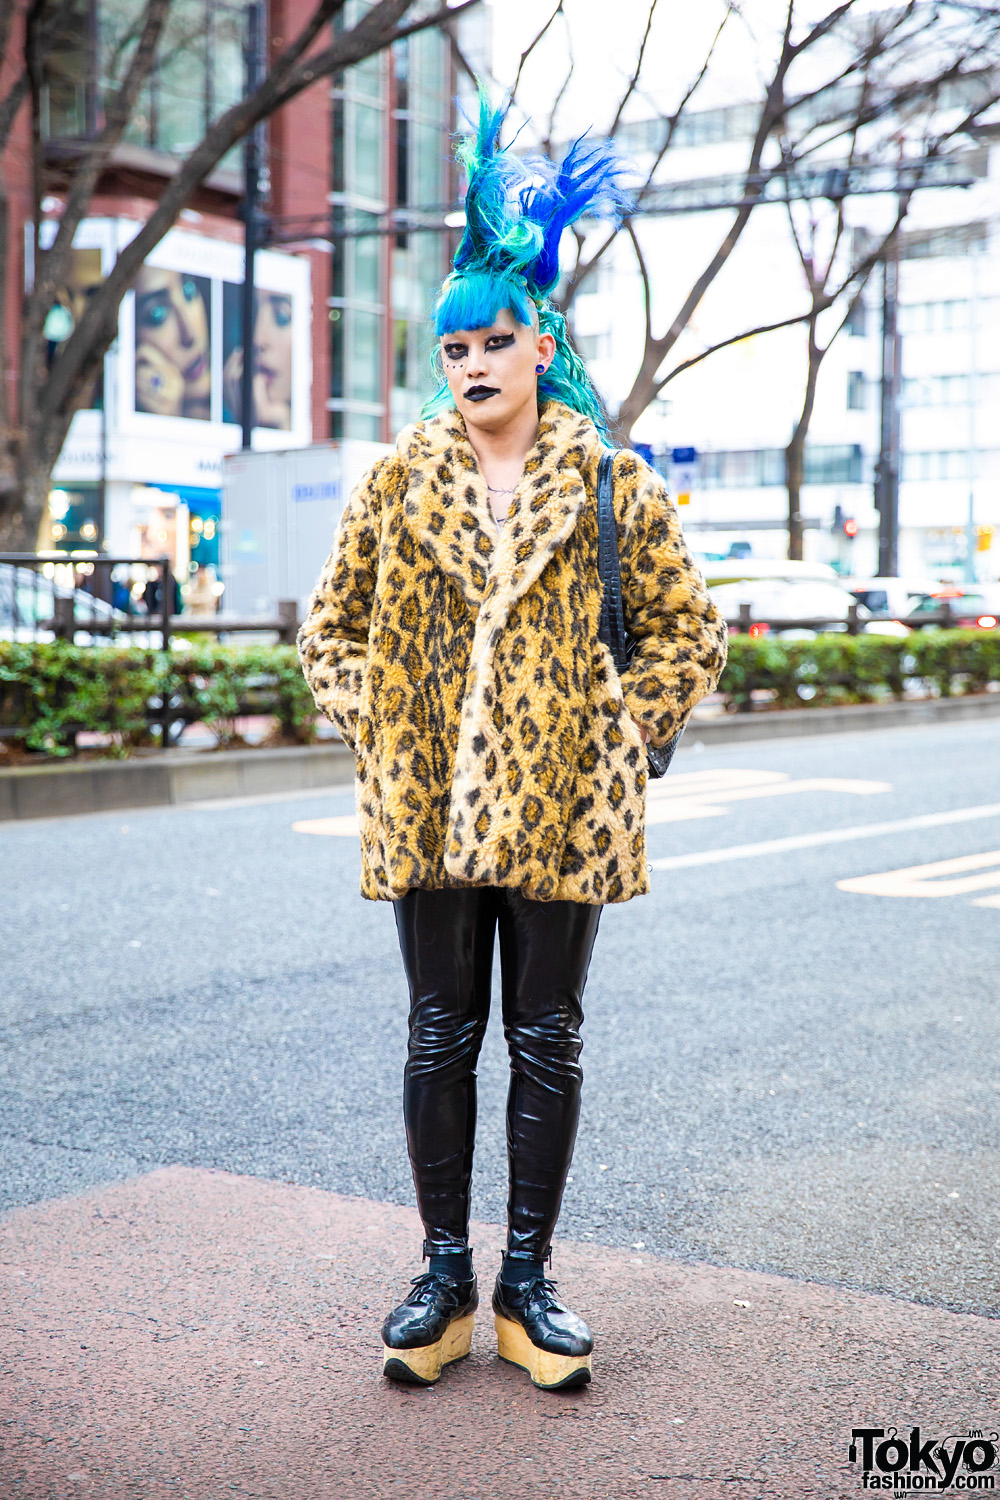 Japanese Fashion Buyer's Street Style w/ Tall Blue Hair, Furry Leopard Coat, Patent Leather Side Zip Pants, Rocking Horse Shoes & Black Makeup